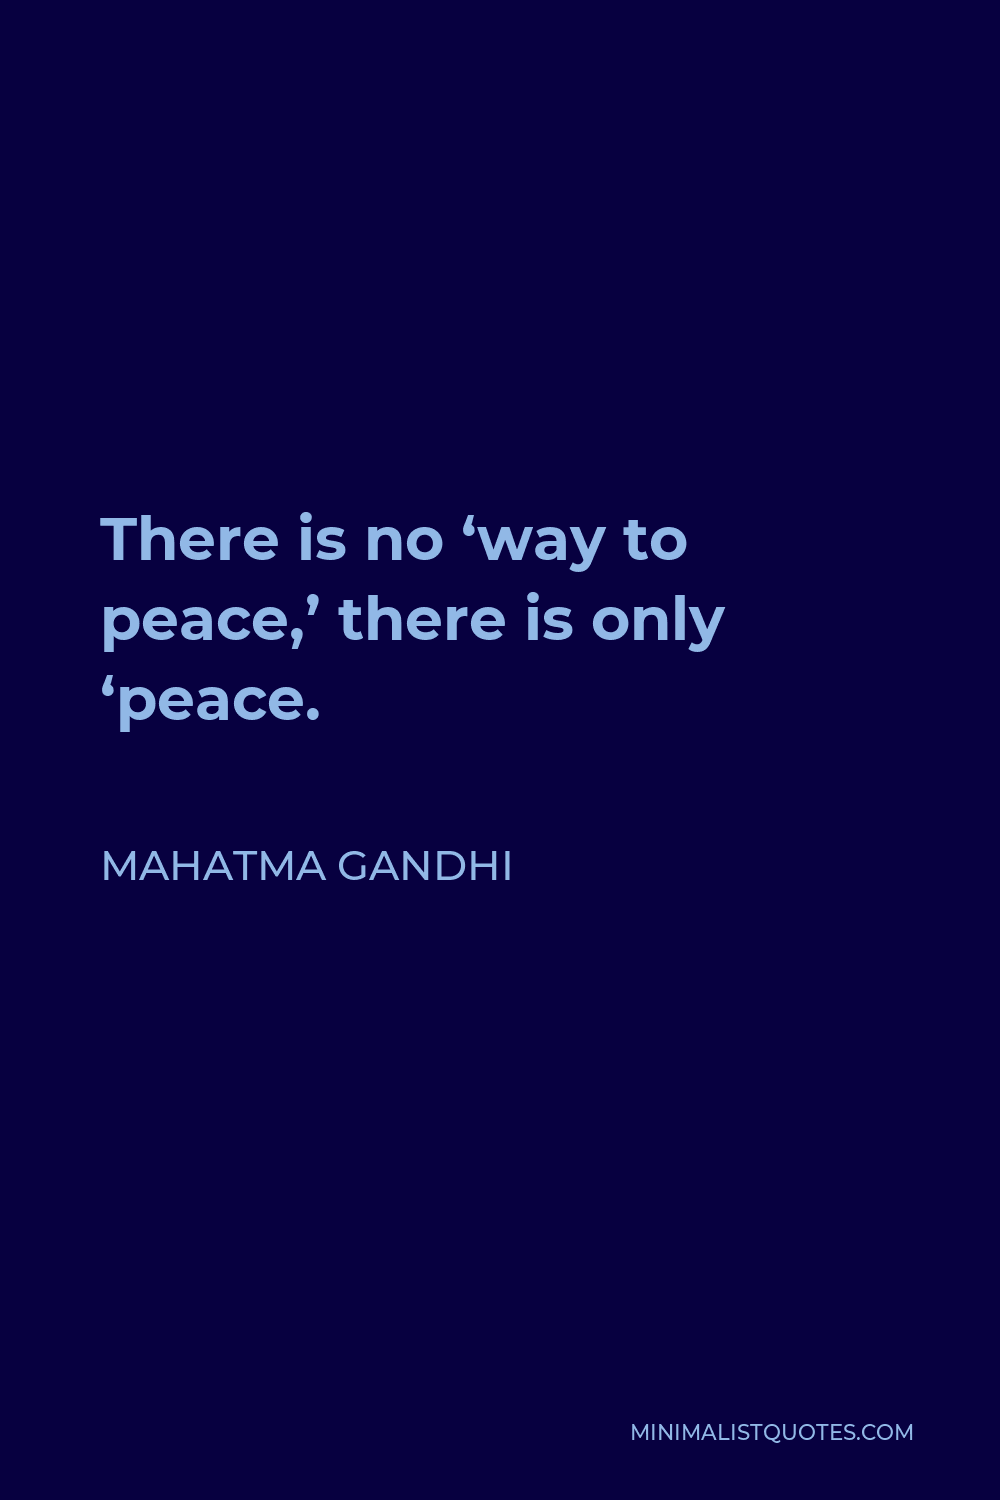 Mahatma Gandhi Quote: There is no 'way to peace,' there is only 'peace.